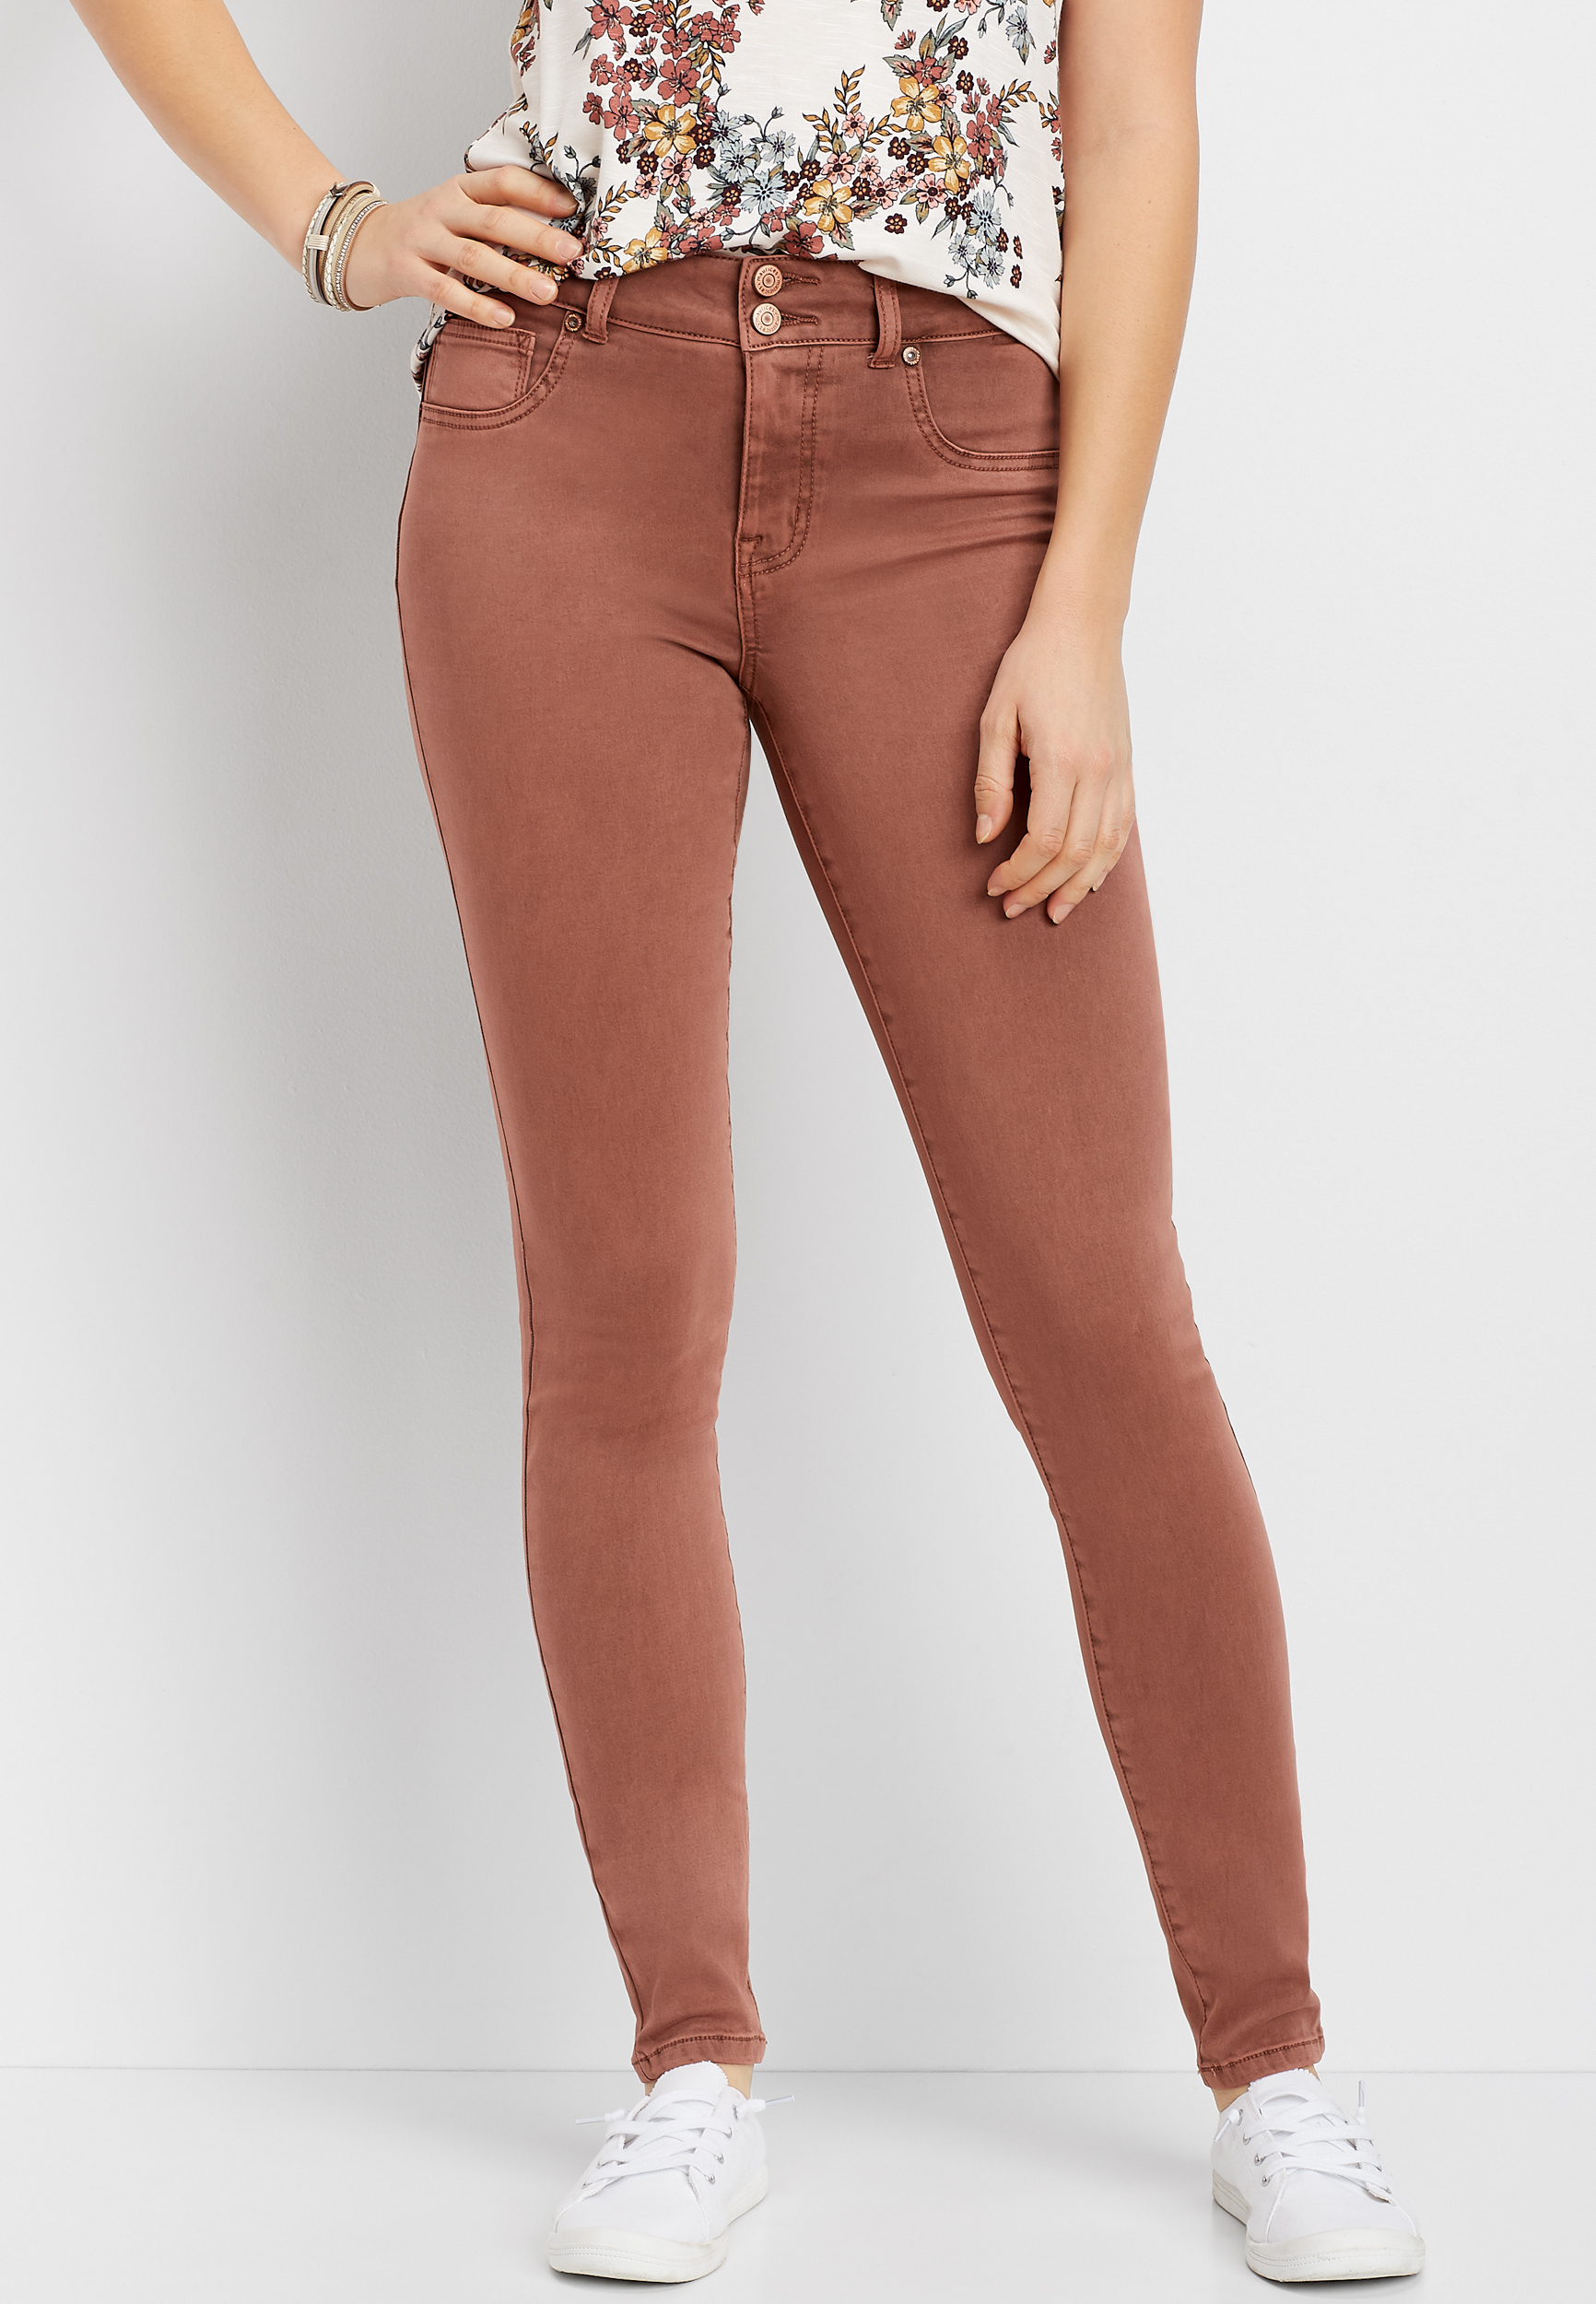 high waisted colored jeggings